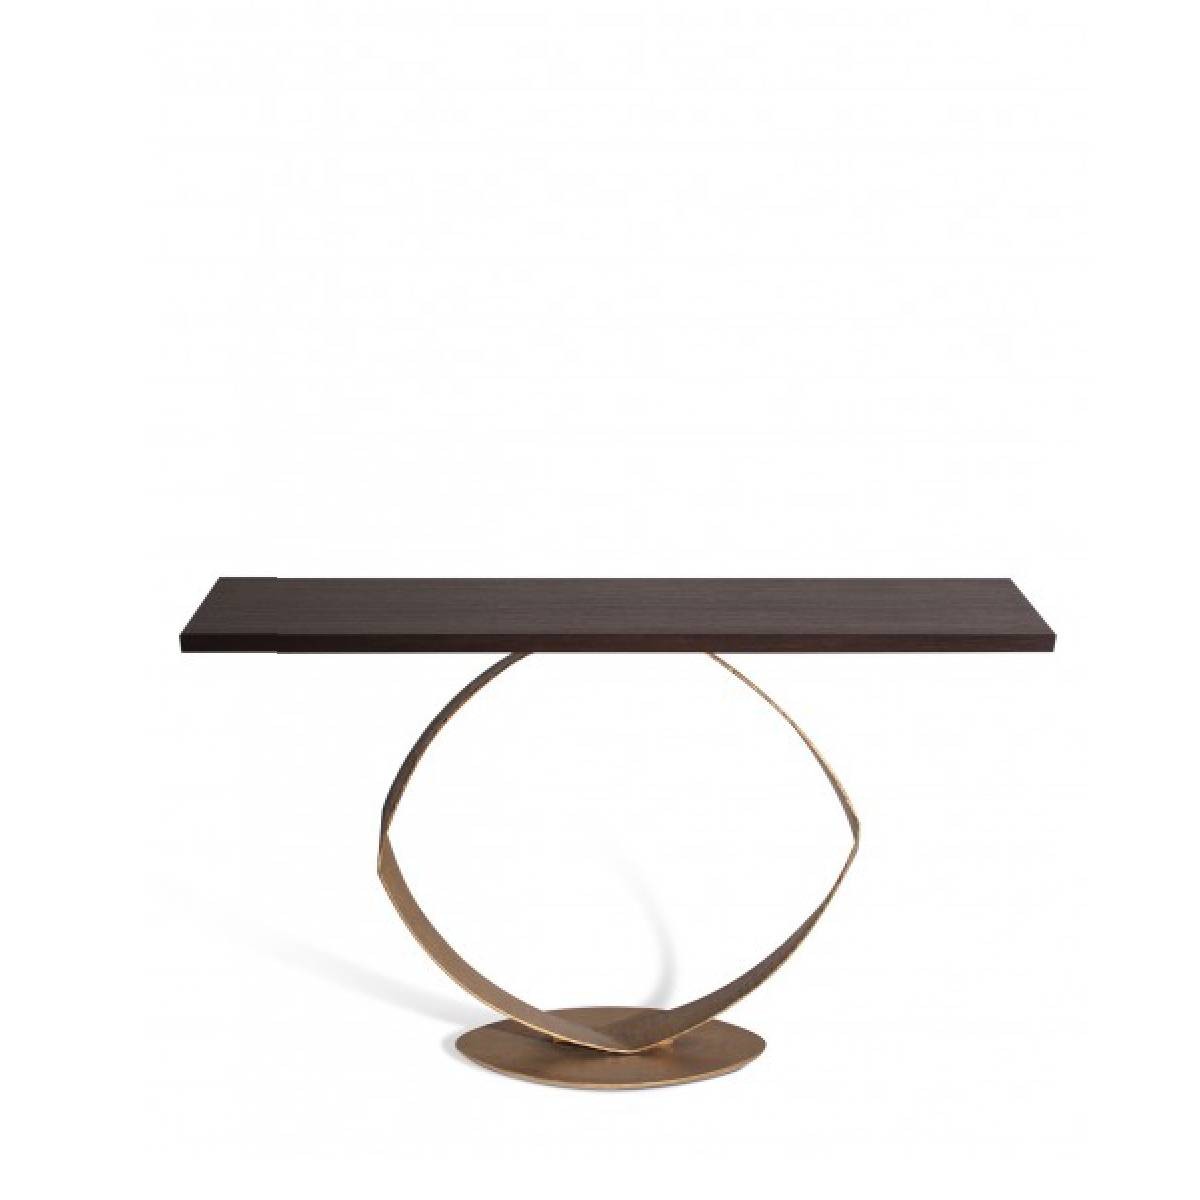 Porta Romana I ’O’ Console Table | French Brass with Darked Fumed Oak Top